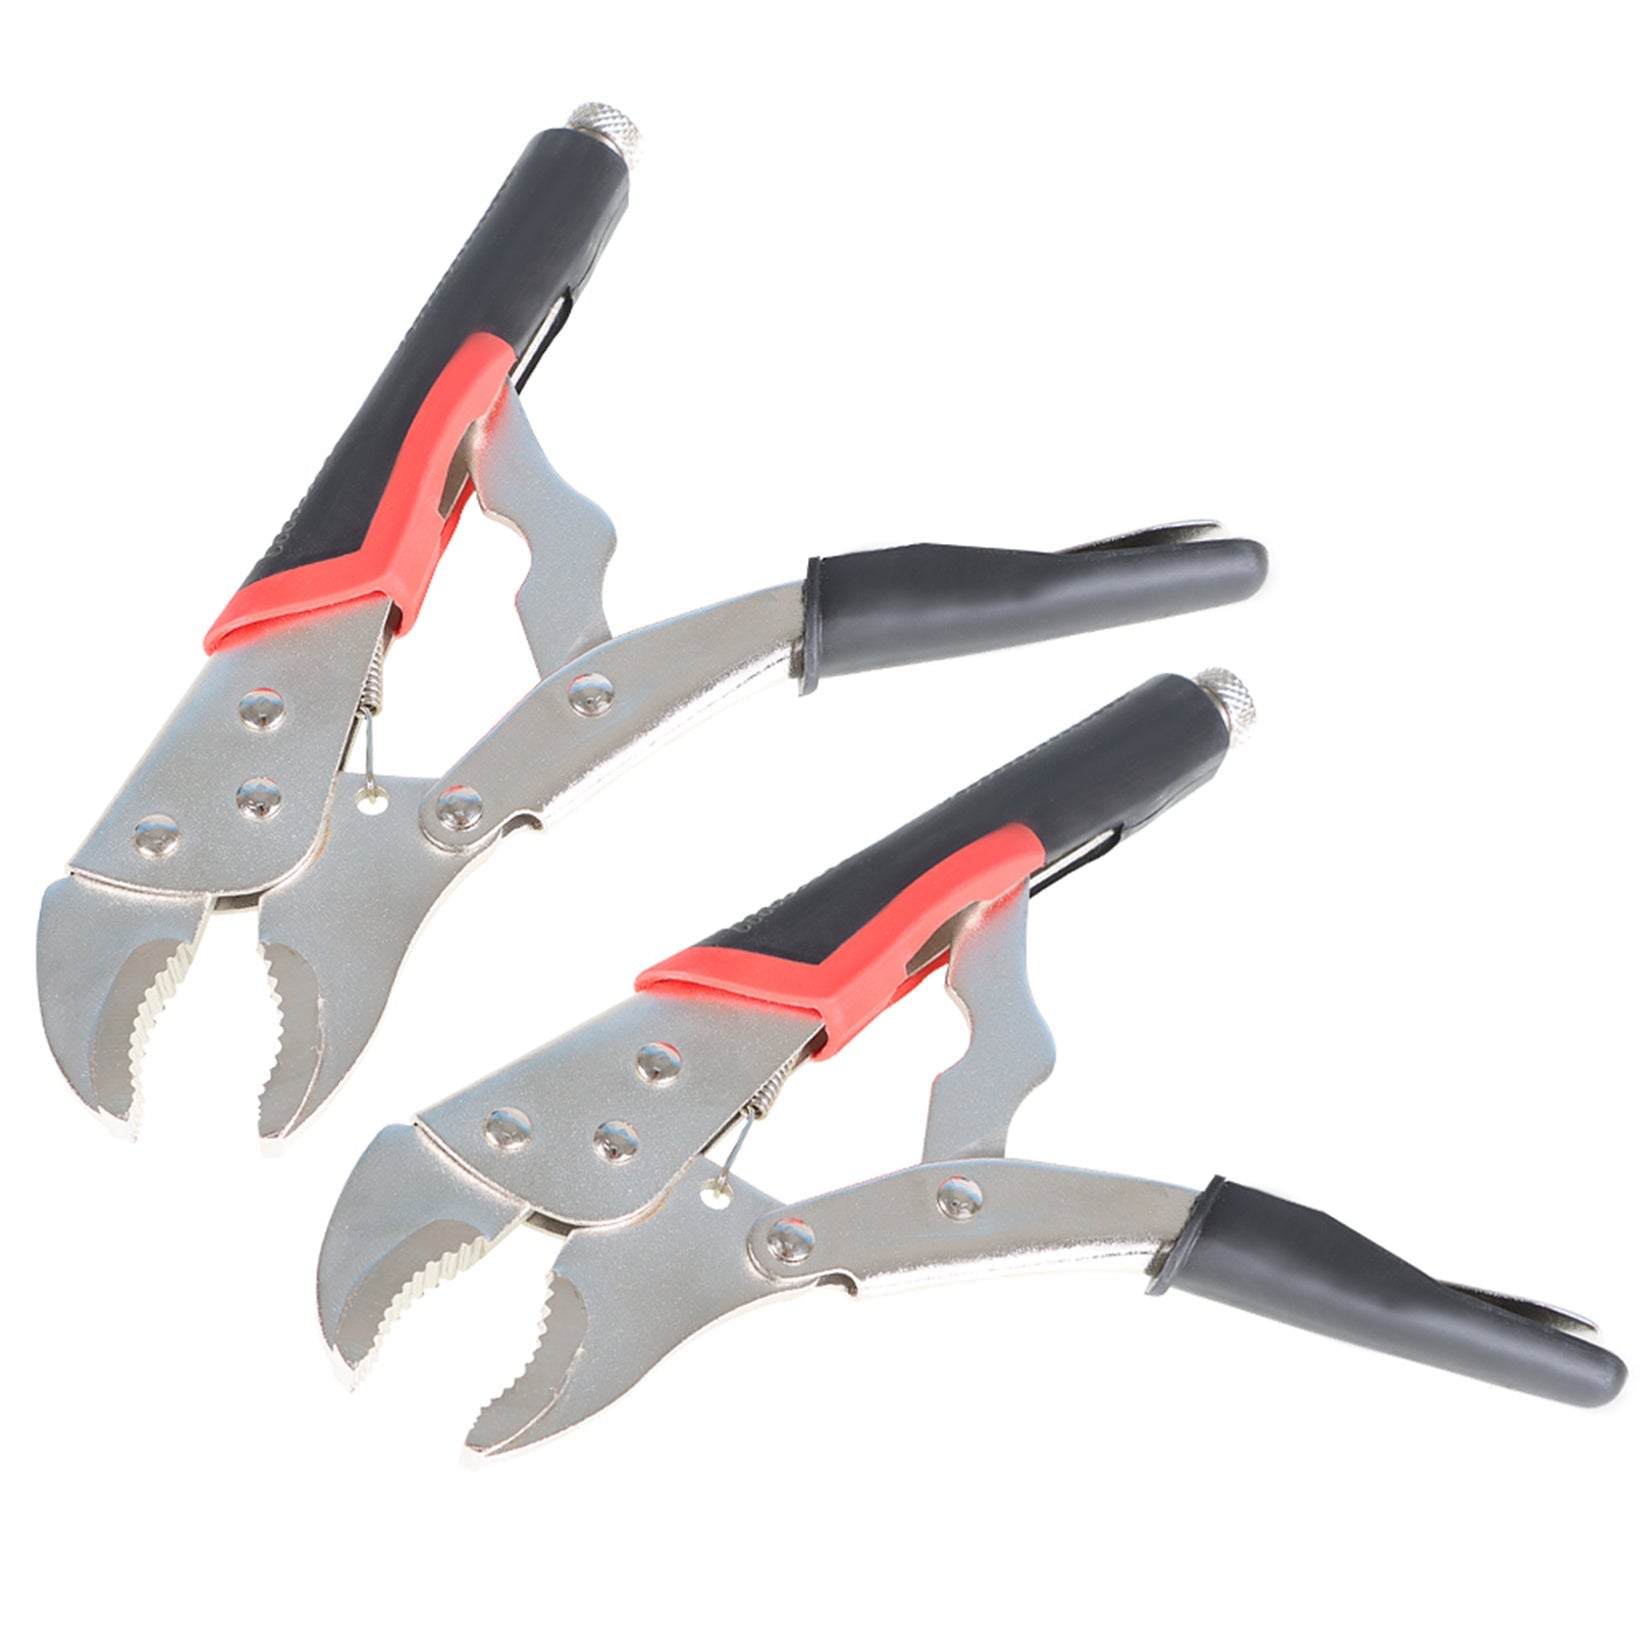 findmall  2Pcs 10 Inch Torque Lock Curved Jaw Locking Plier Set Chrome-vanadium Steel Fast Setup Easy Release for Home Shop Workshop and Automotive Use FINDMALLPARTS